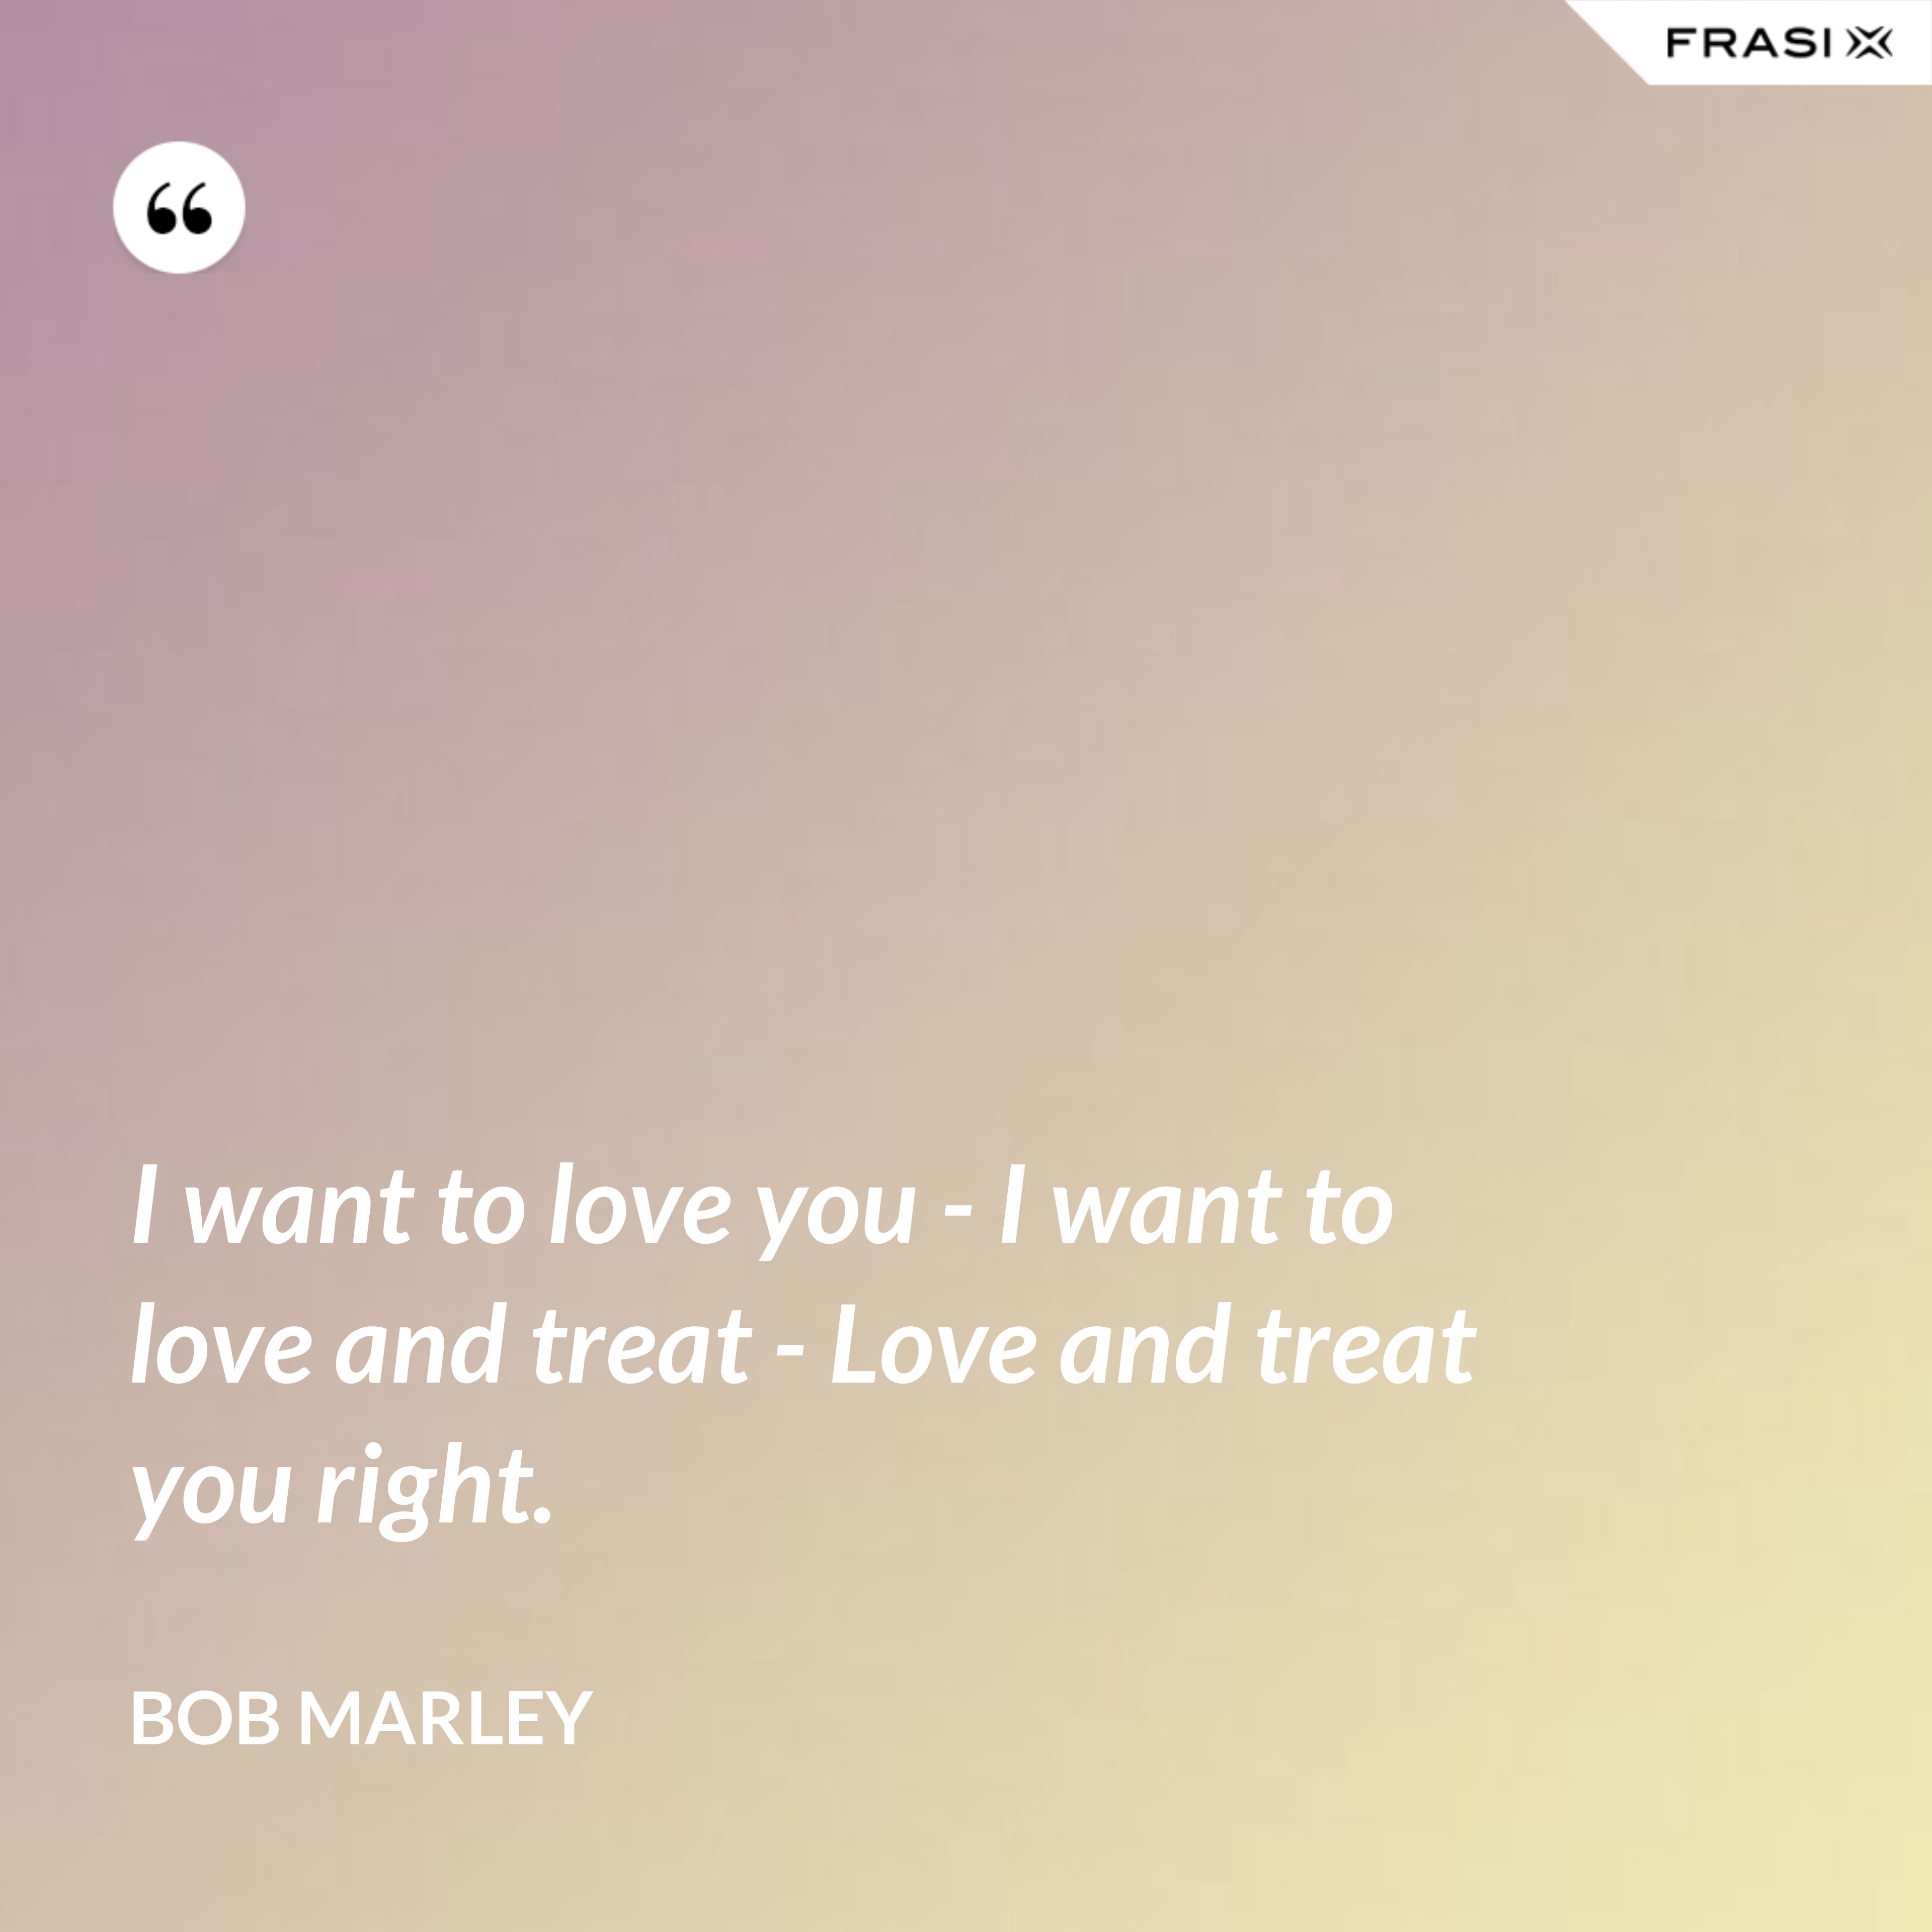 I want to love you - I want to love and treat - Love and treat you right. - Bob Marley